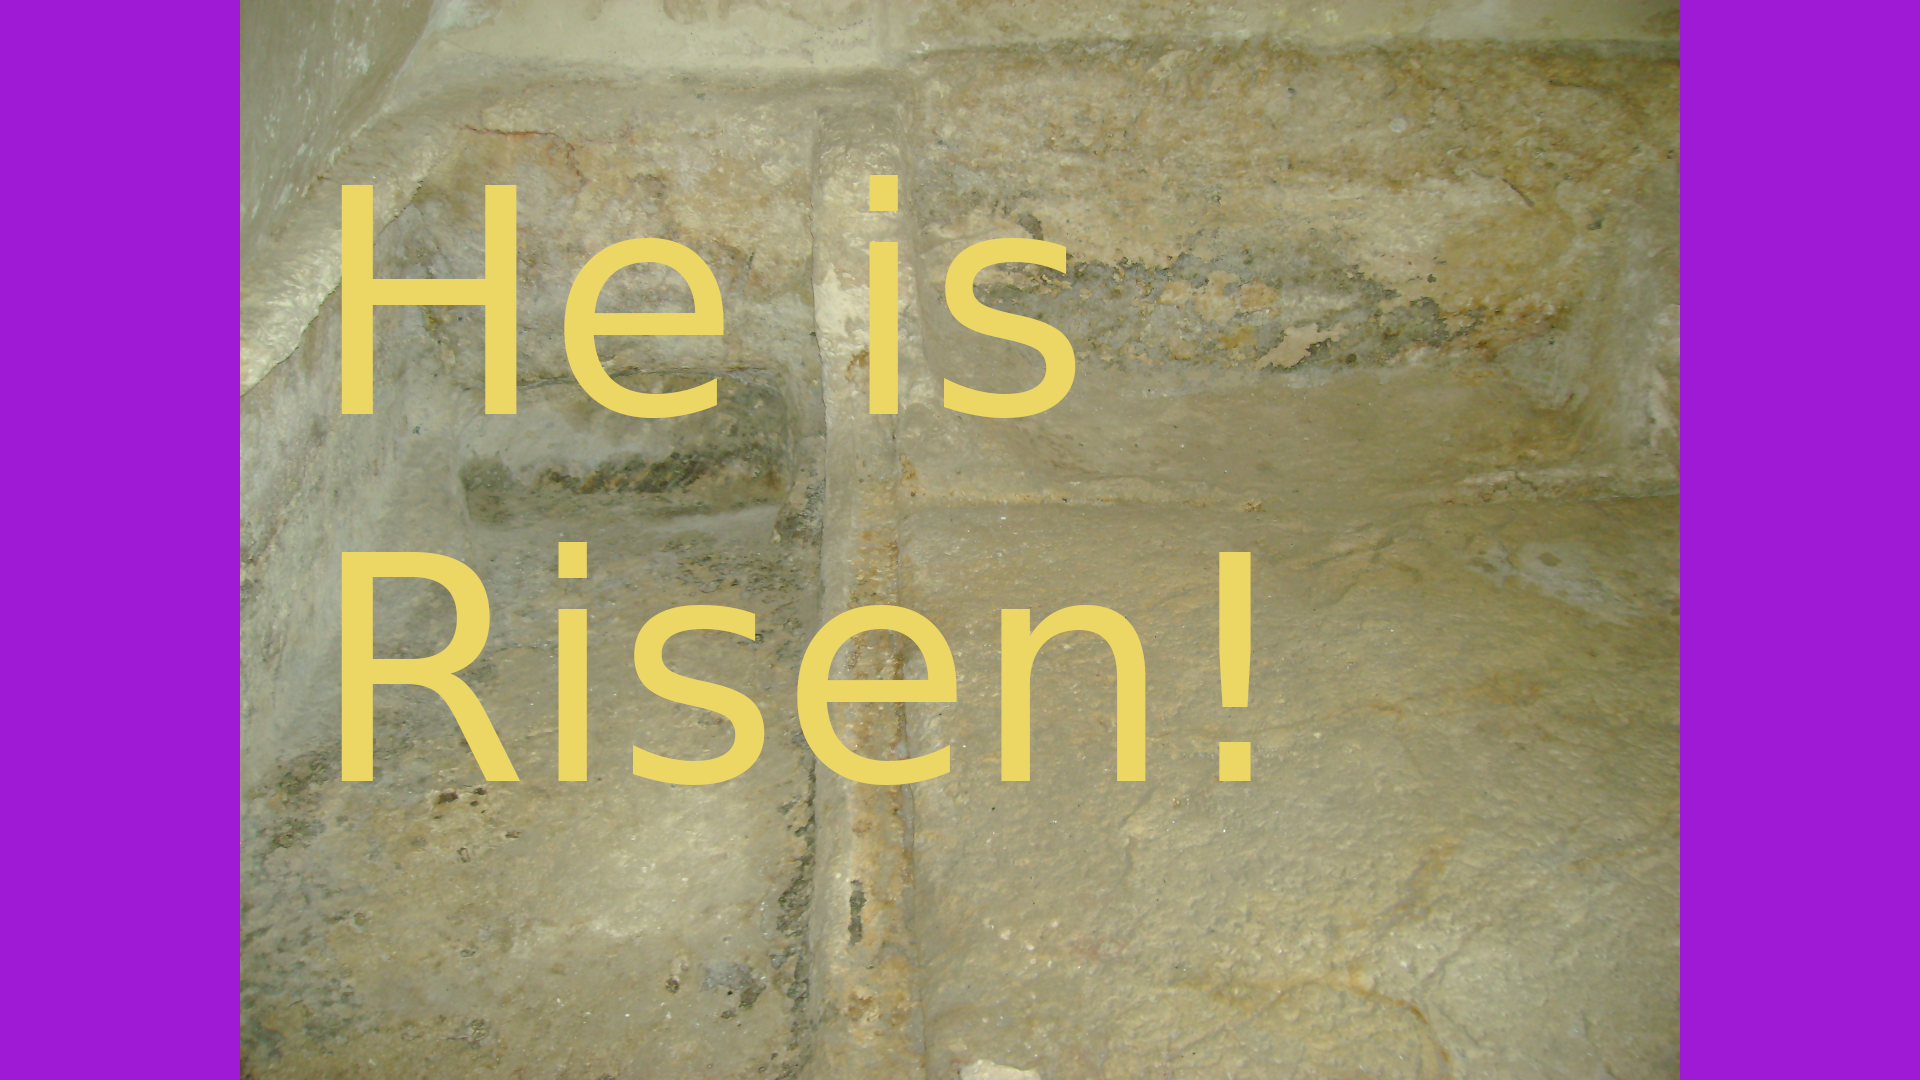 Easter and its meaning: He is Risen!